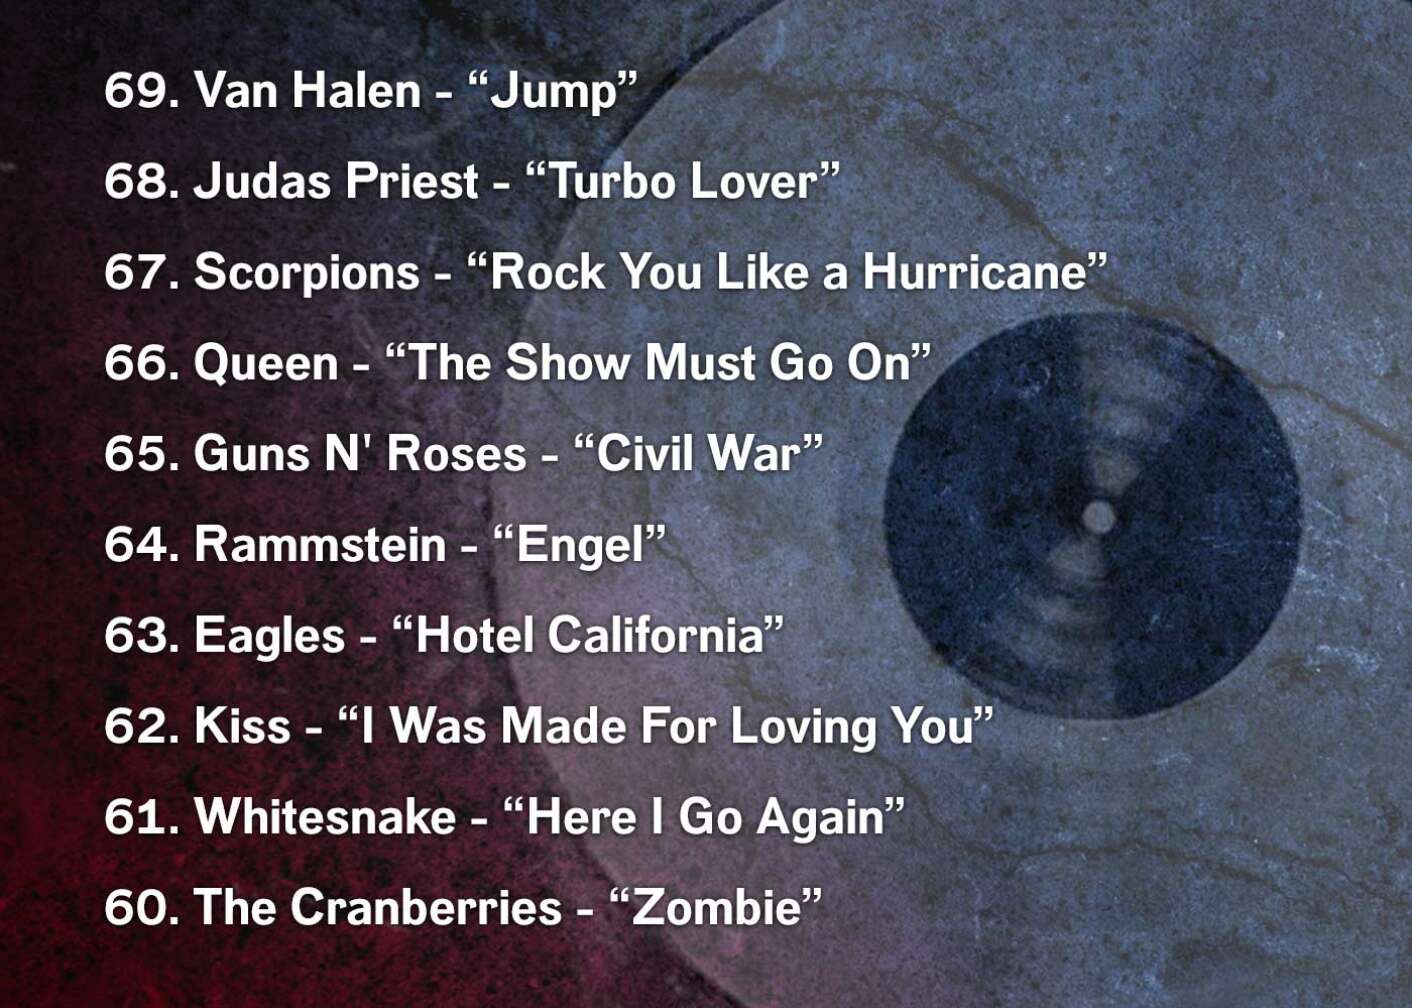 69. Van Halen - “Jump” 68. Judas Priest - “Turbo Lover” 67. Scorpions - “Rock You Like a Hurricane” 66. Queen - “The Show Must Go On” 65. Guns N' Roses - “Civil War” 64. Rammstein - “Engel” 63. Eagles - “Hotel California” 62. Kiss - “I Was Made For Loving You” 61. Whitesnake - “Here I Go Again” 60. The Cranberries - “Zombie”